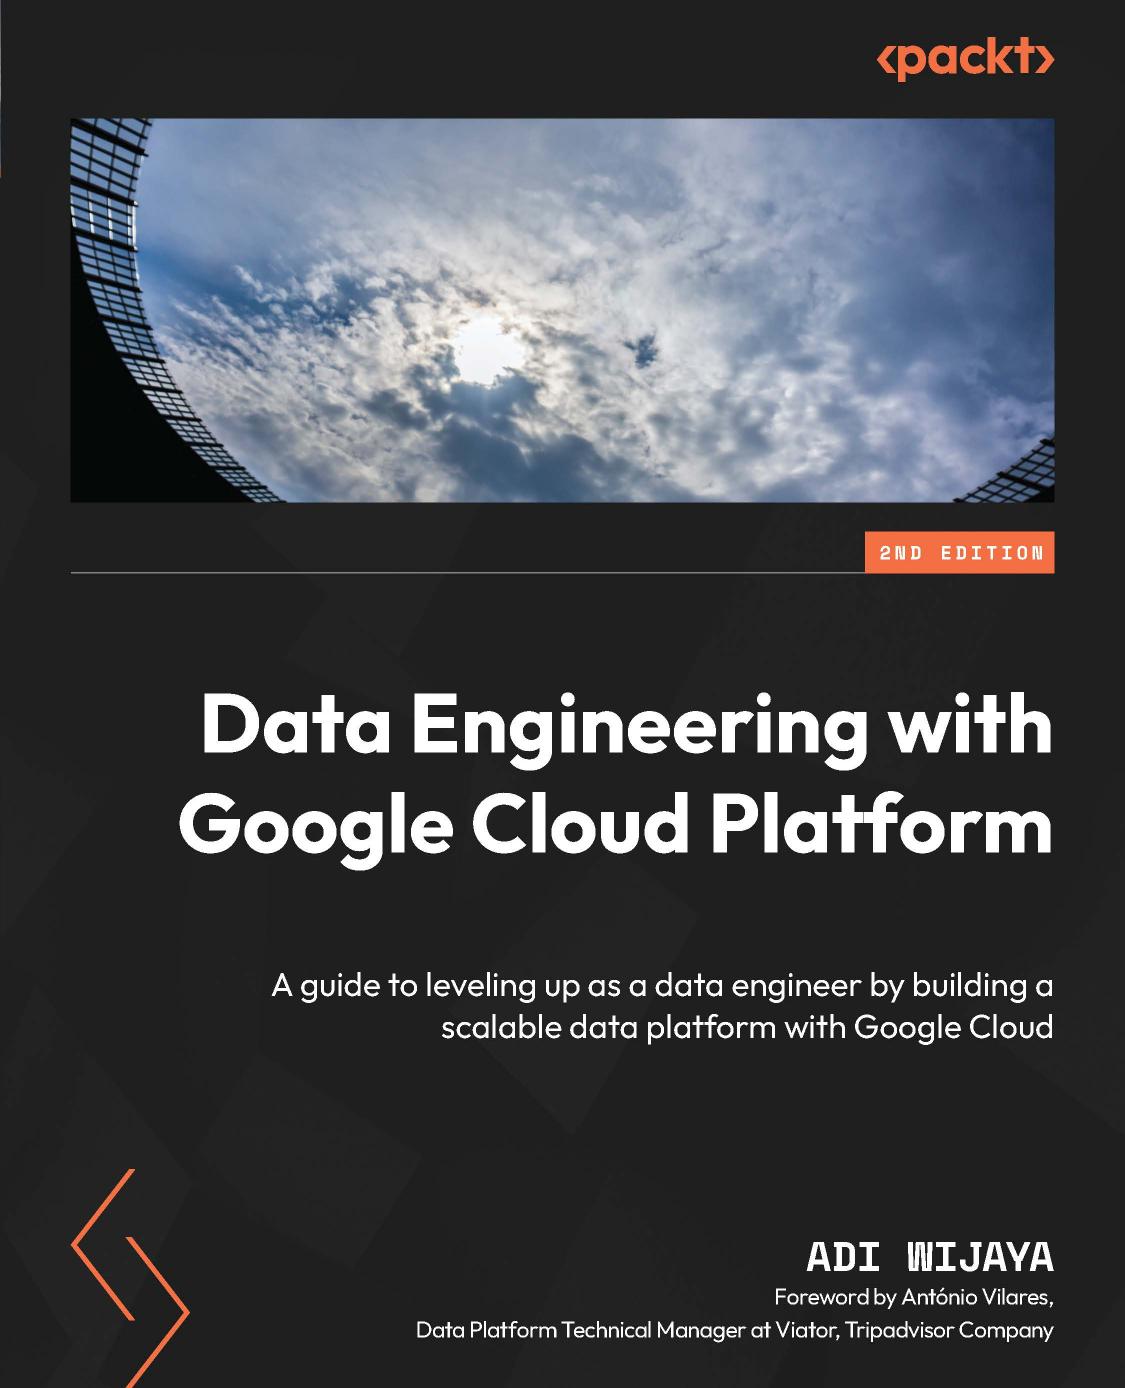 Data Engineering With Google Cloud Platform - Second Edition: A Guide to Leveling Up as a Data Engineer by Building a Scalable Data Platform With Google Cloud